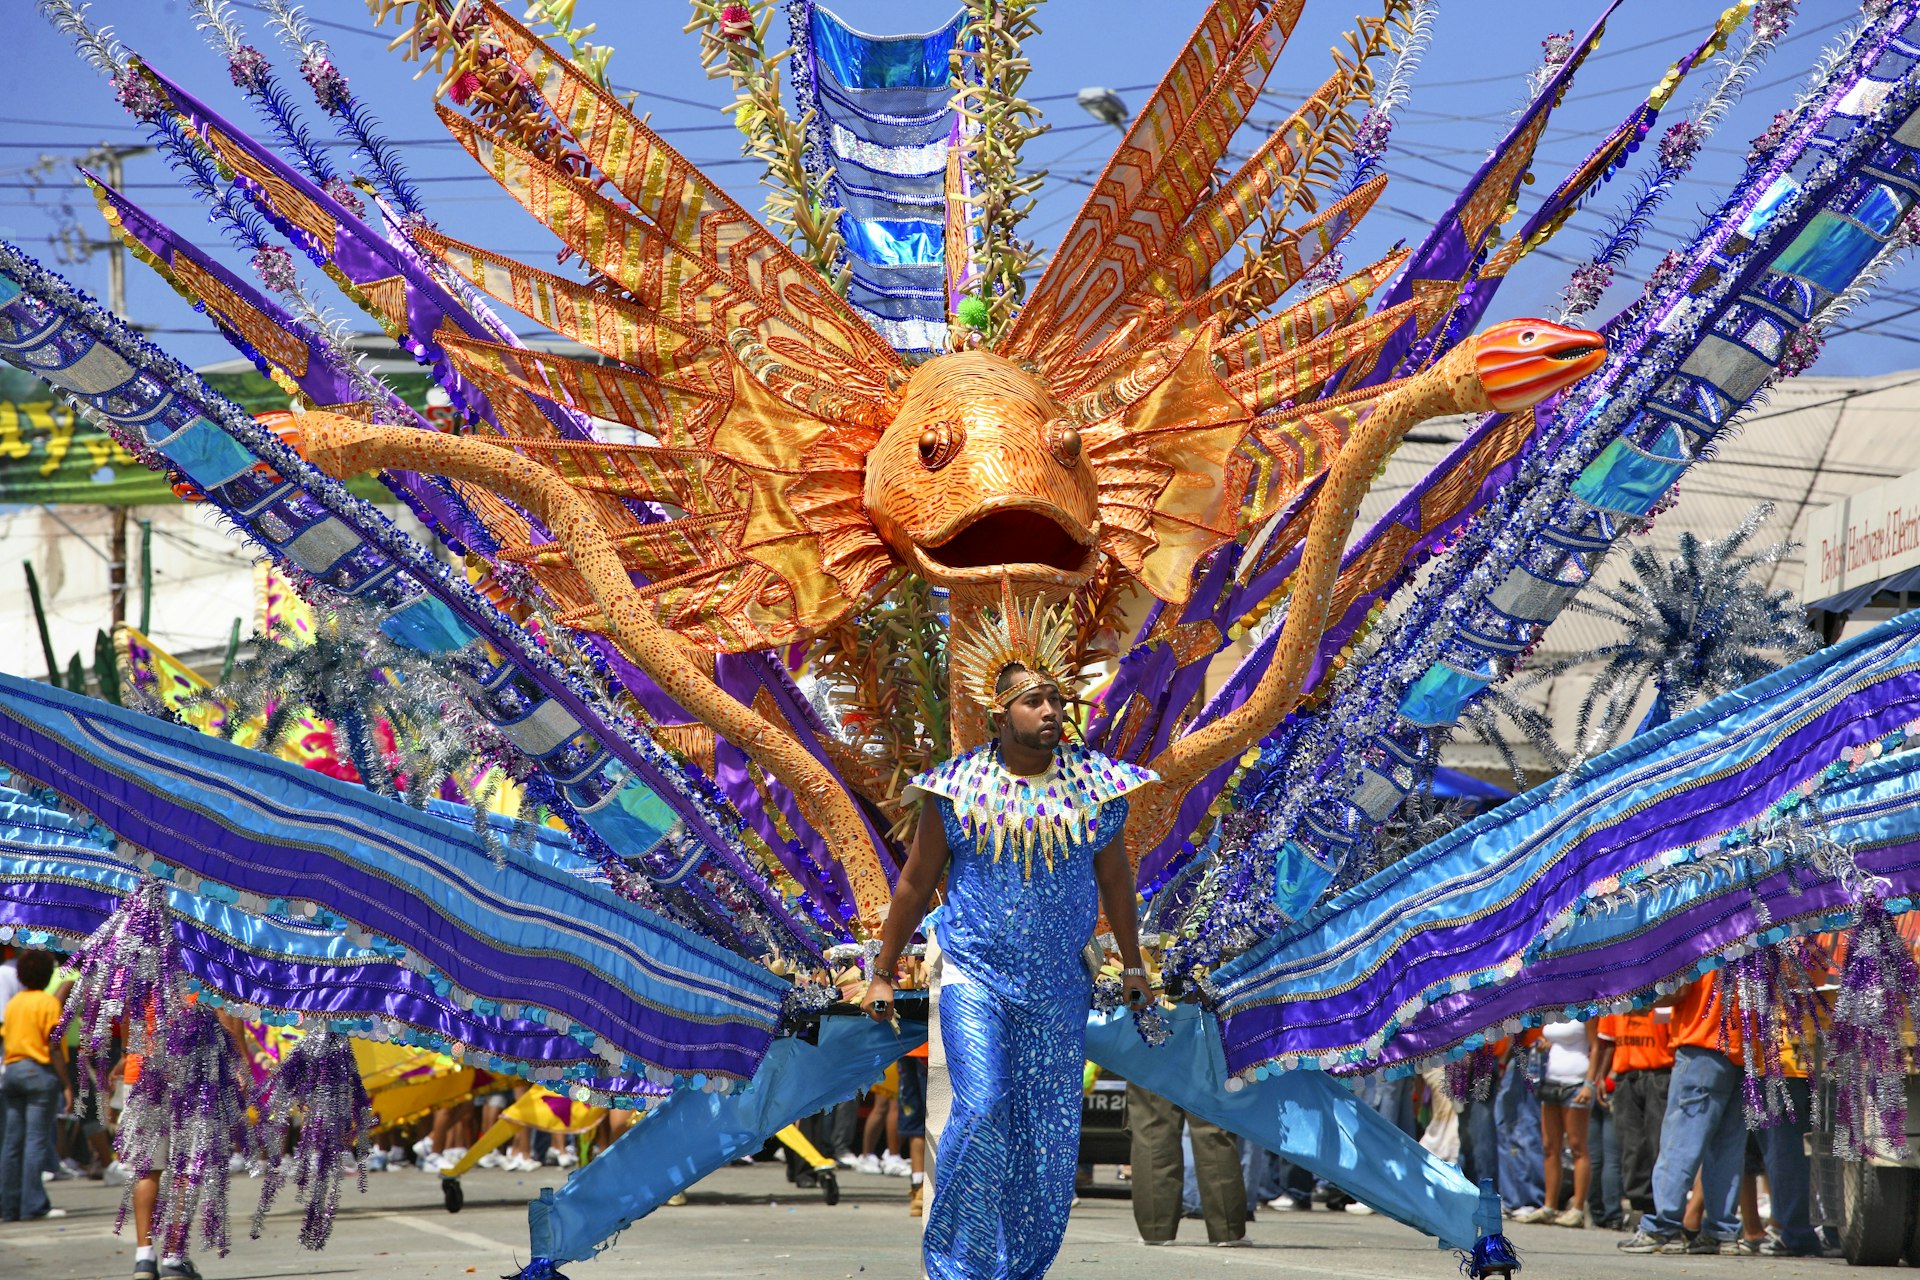 A costumed man in a Carnival parade in front of a giant fish float